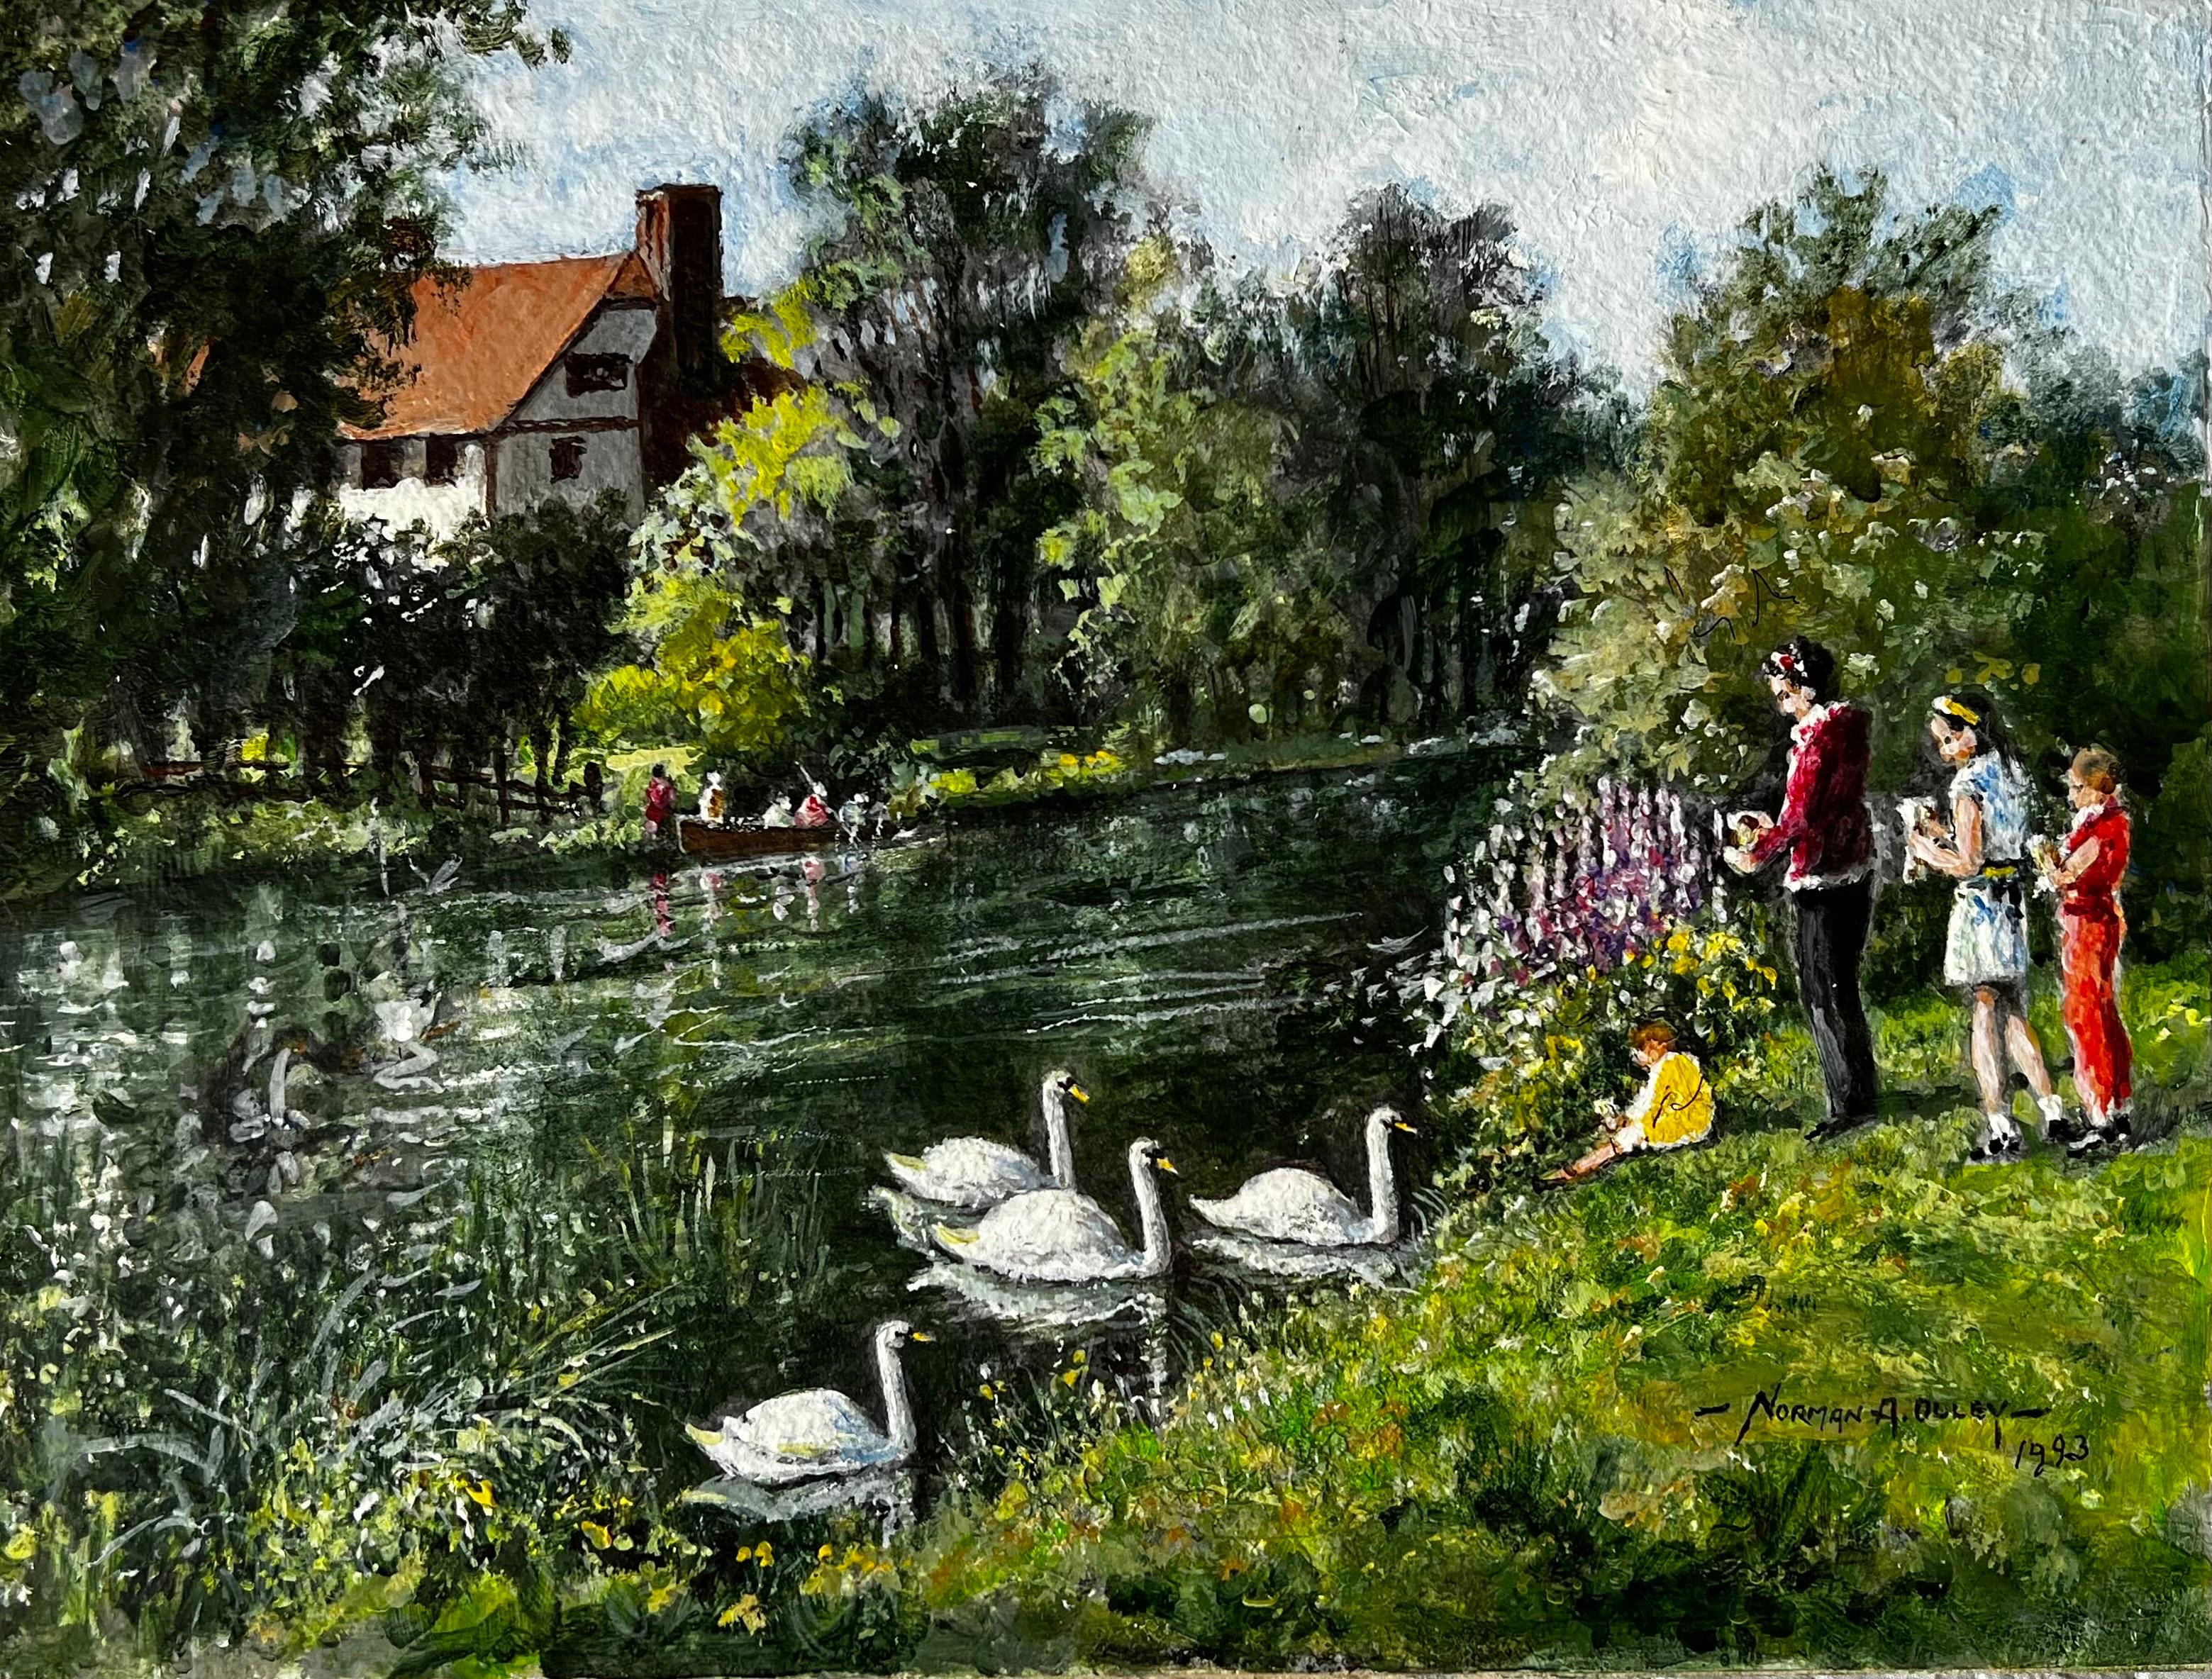 Norman A Olley Landscape Painting - A Family Day Out Feeding The Swans By The River Mole